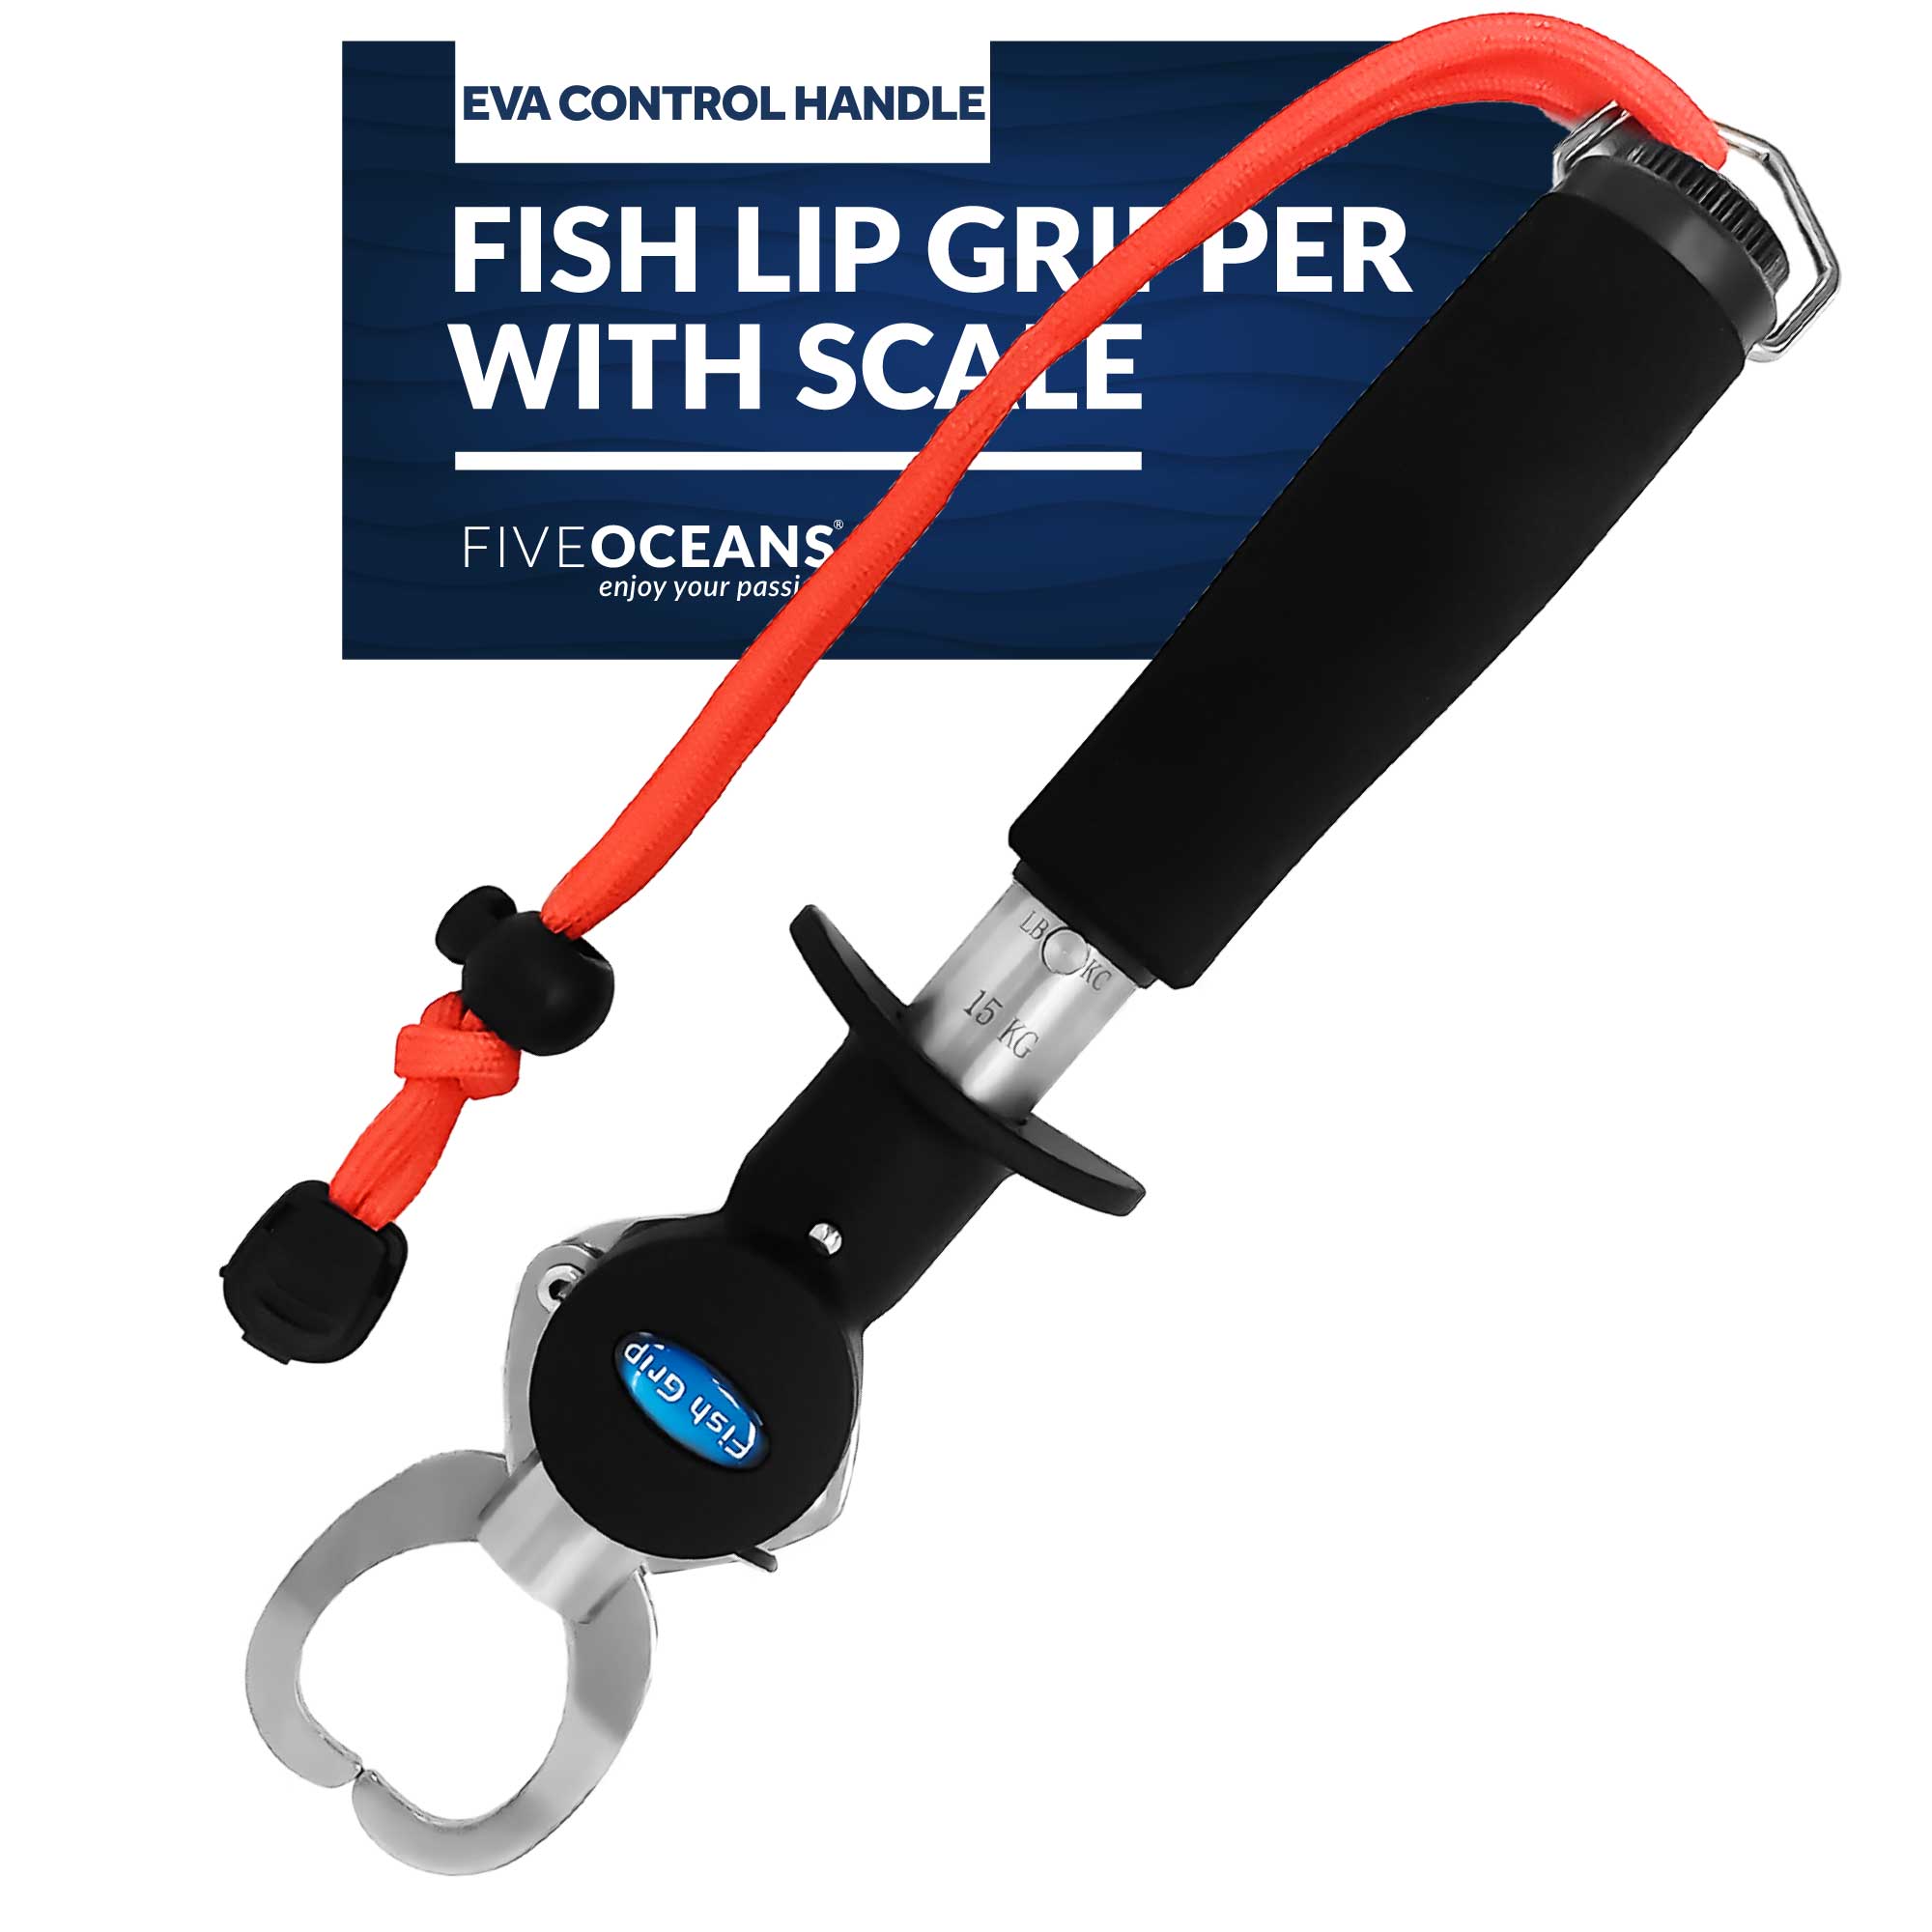 Stainless Steel Fish Lip Gripper with Scale and EVA Control Handle - FO4462